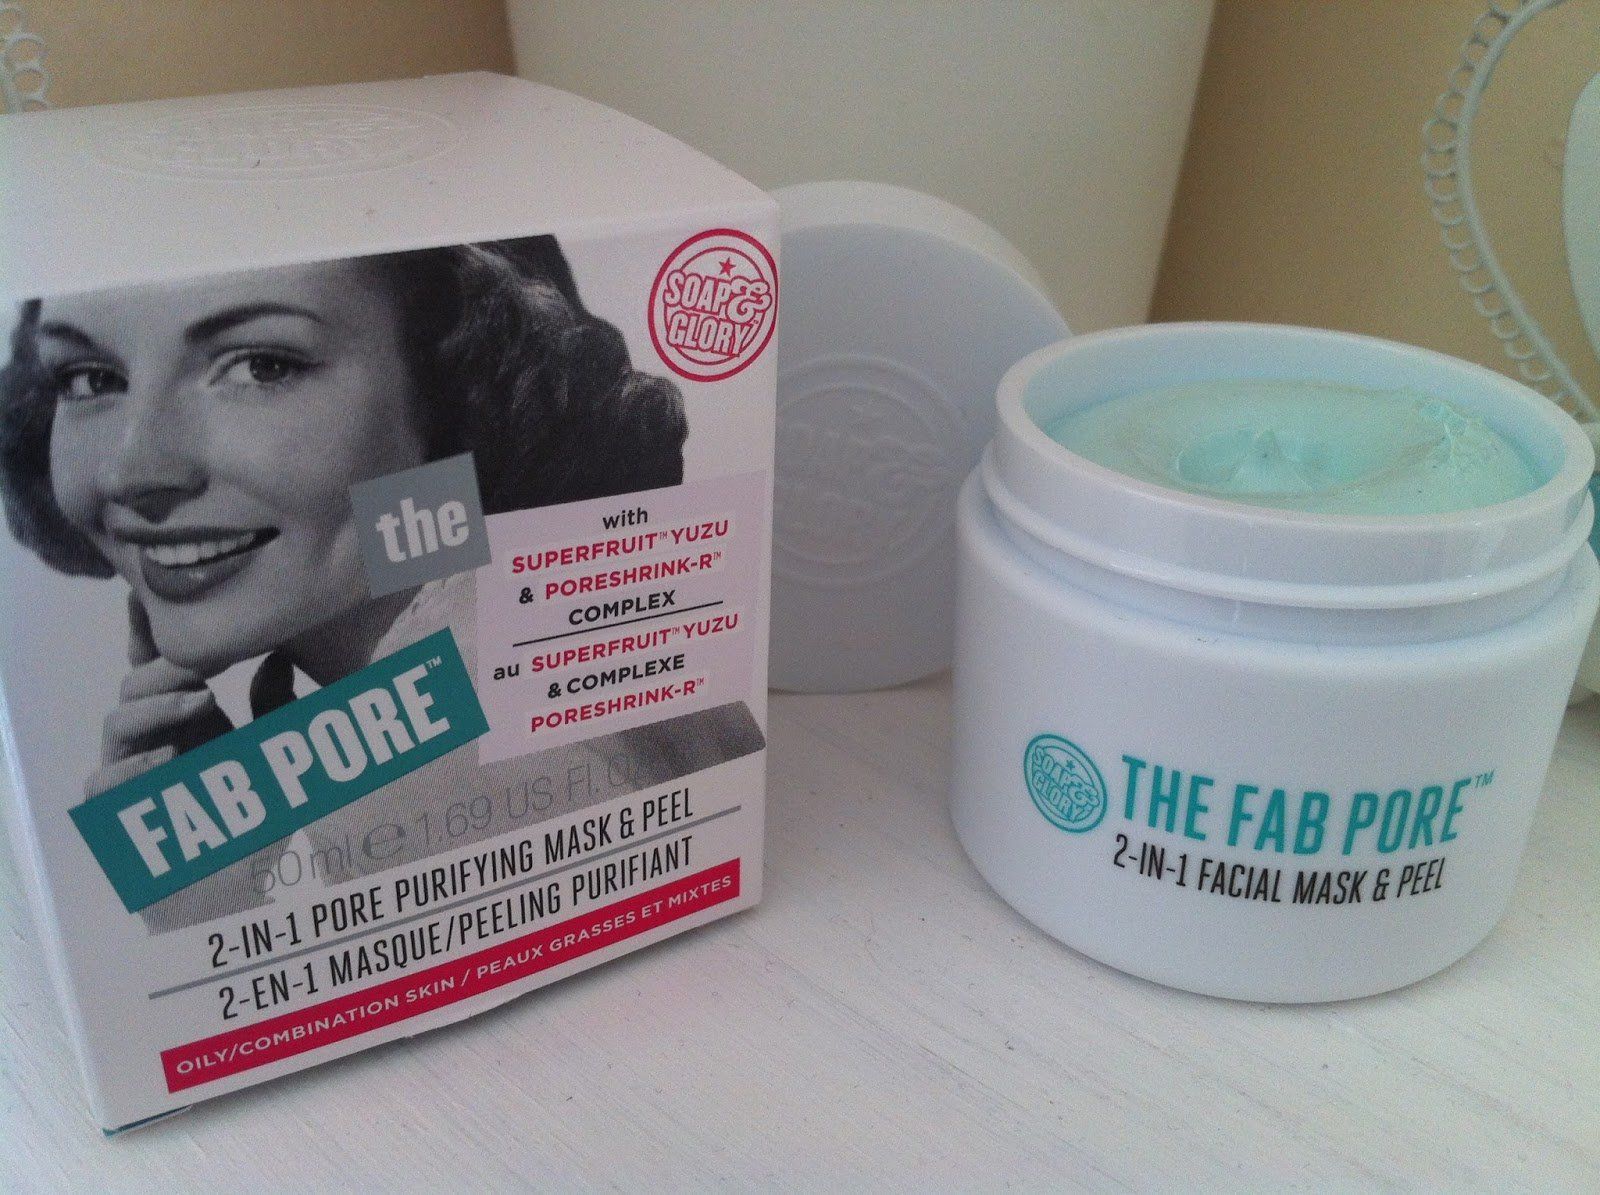 Genghis reccomend Soap glory the fab pore 15 minute facial peel